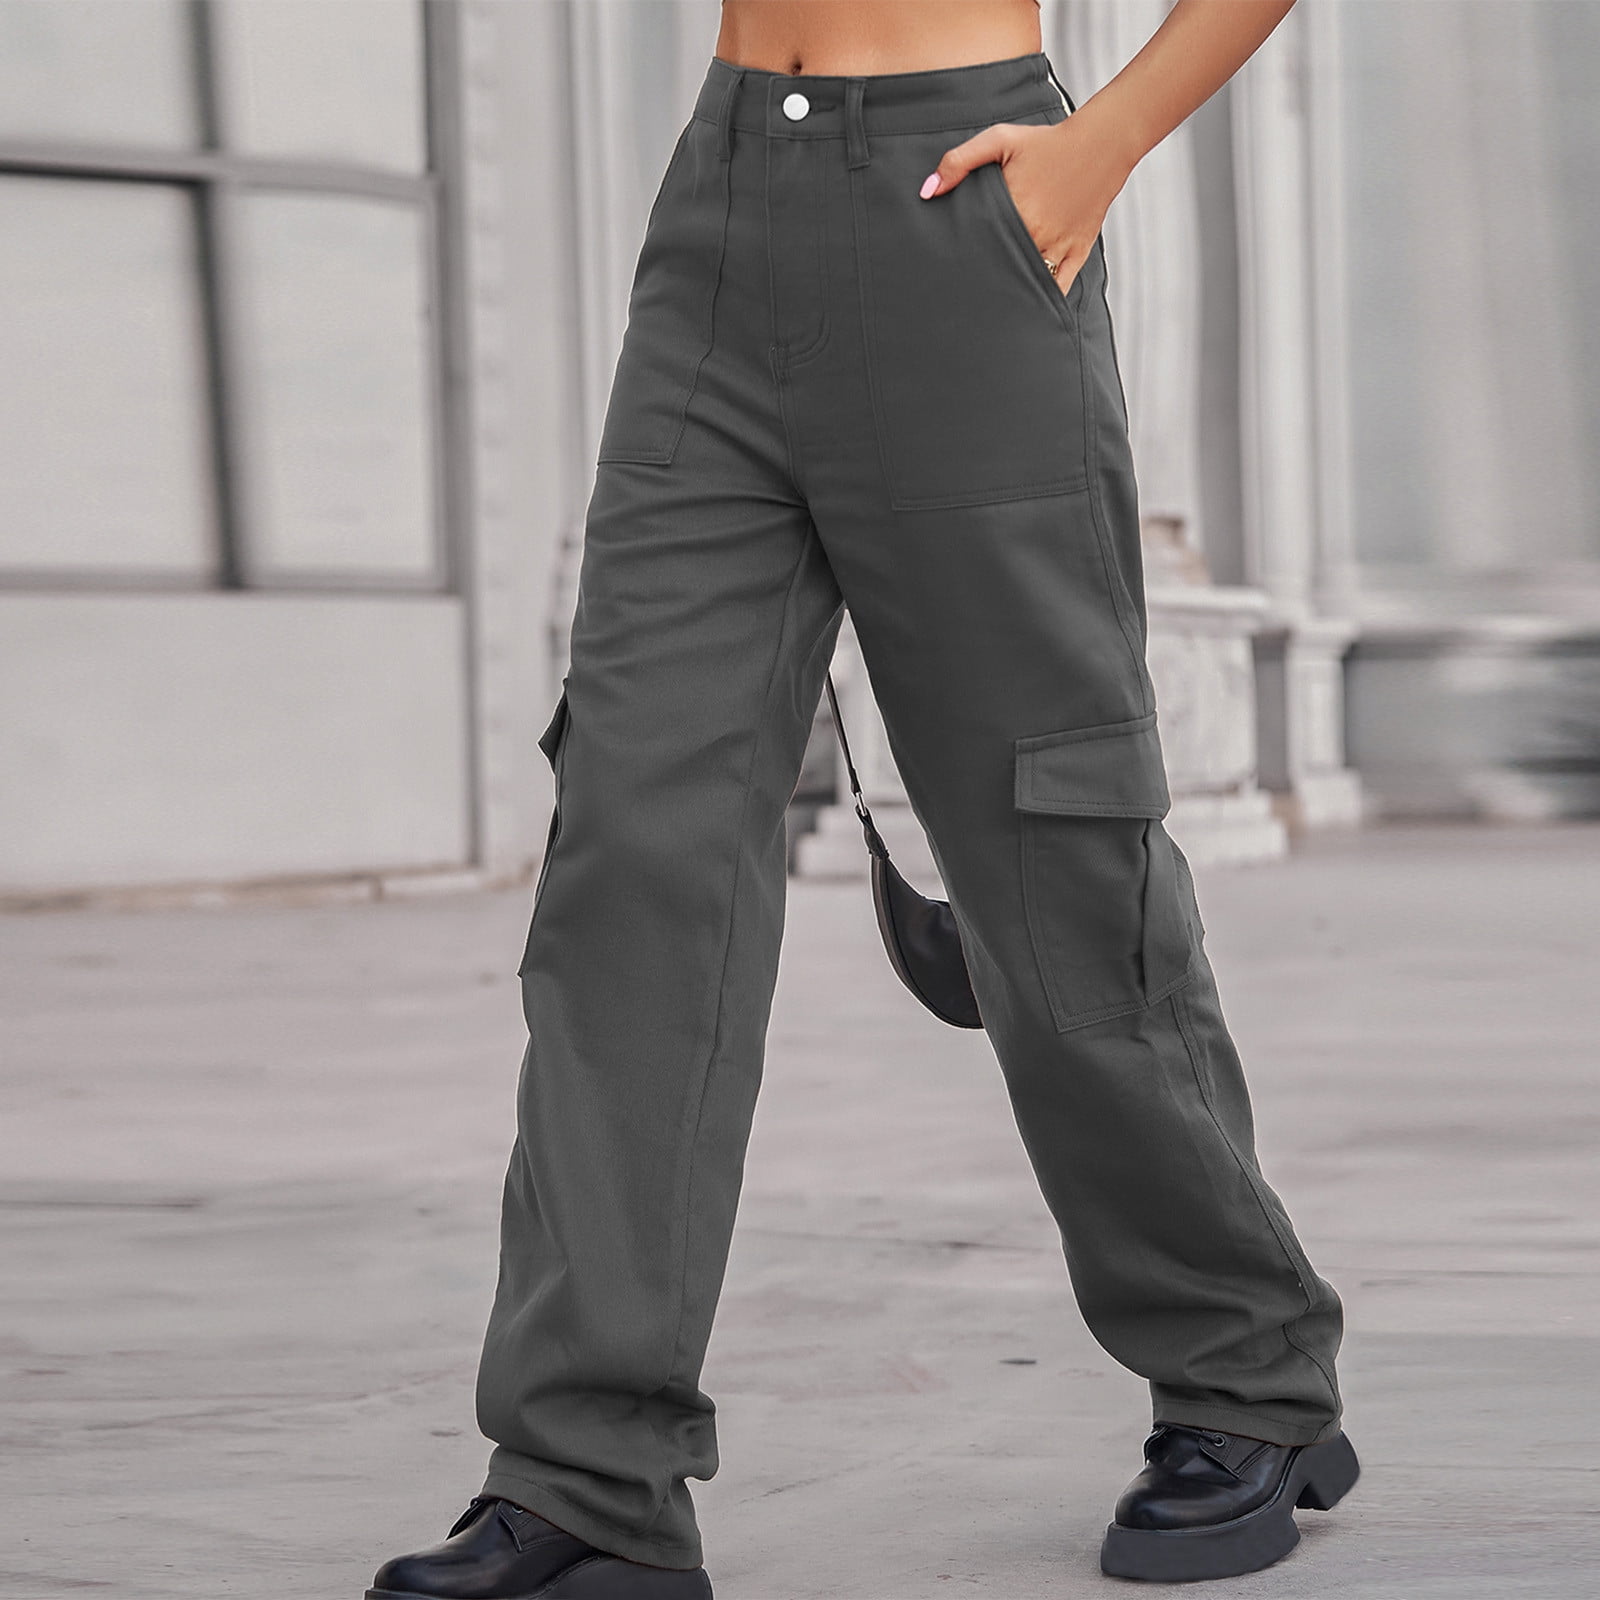 SELONE High Waisted Cargo Pants Women With Pockets Denim Casual Long Pant  Straight Leg Solid Pants Hippie Punk Trousers Jogger Loose Overalls s for  Everyday Wear Running Work Casual Event Khaki S 